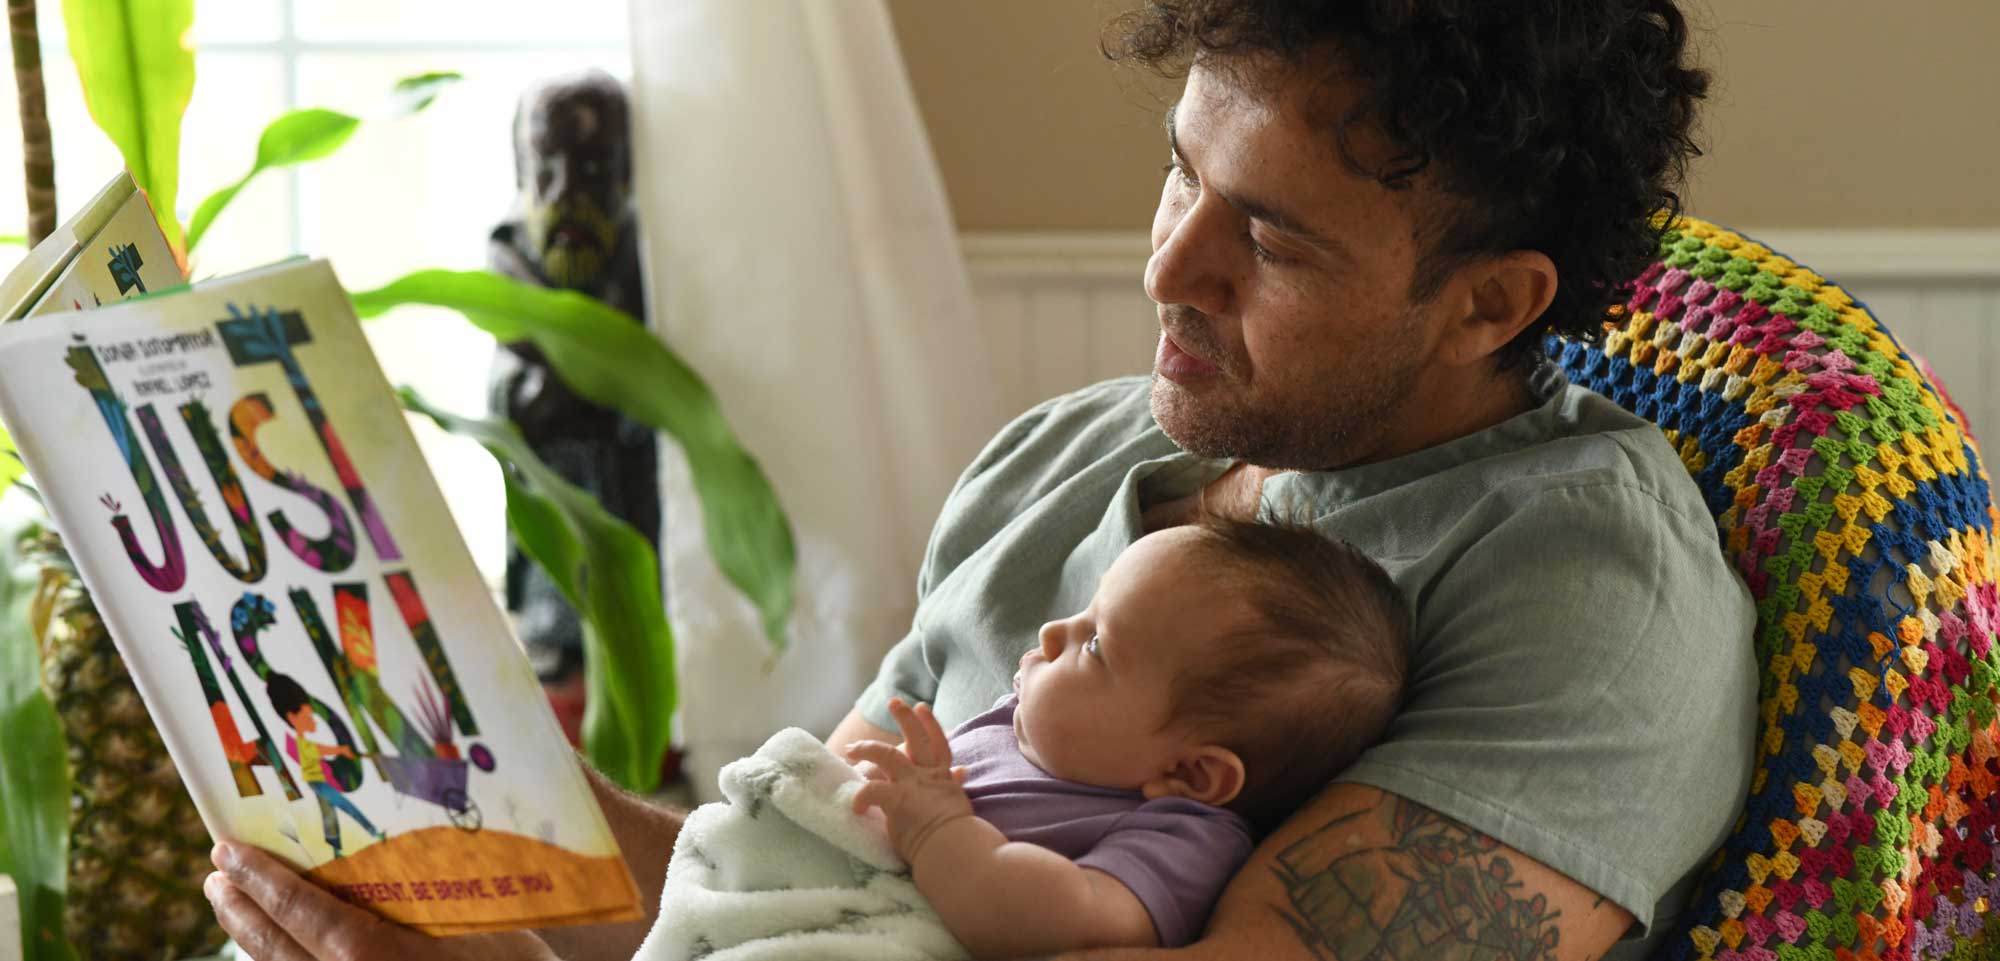 502-dad-reading-to-baby-17219299220406.jpg